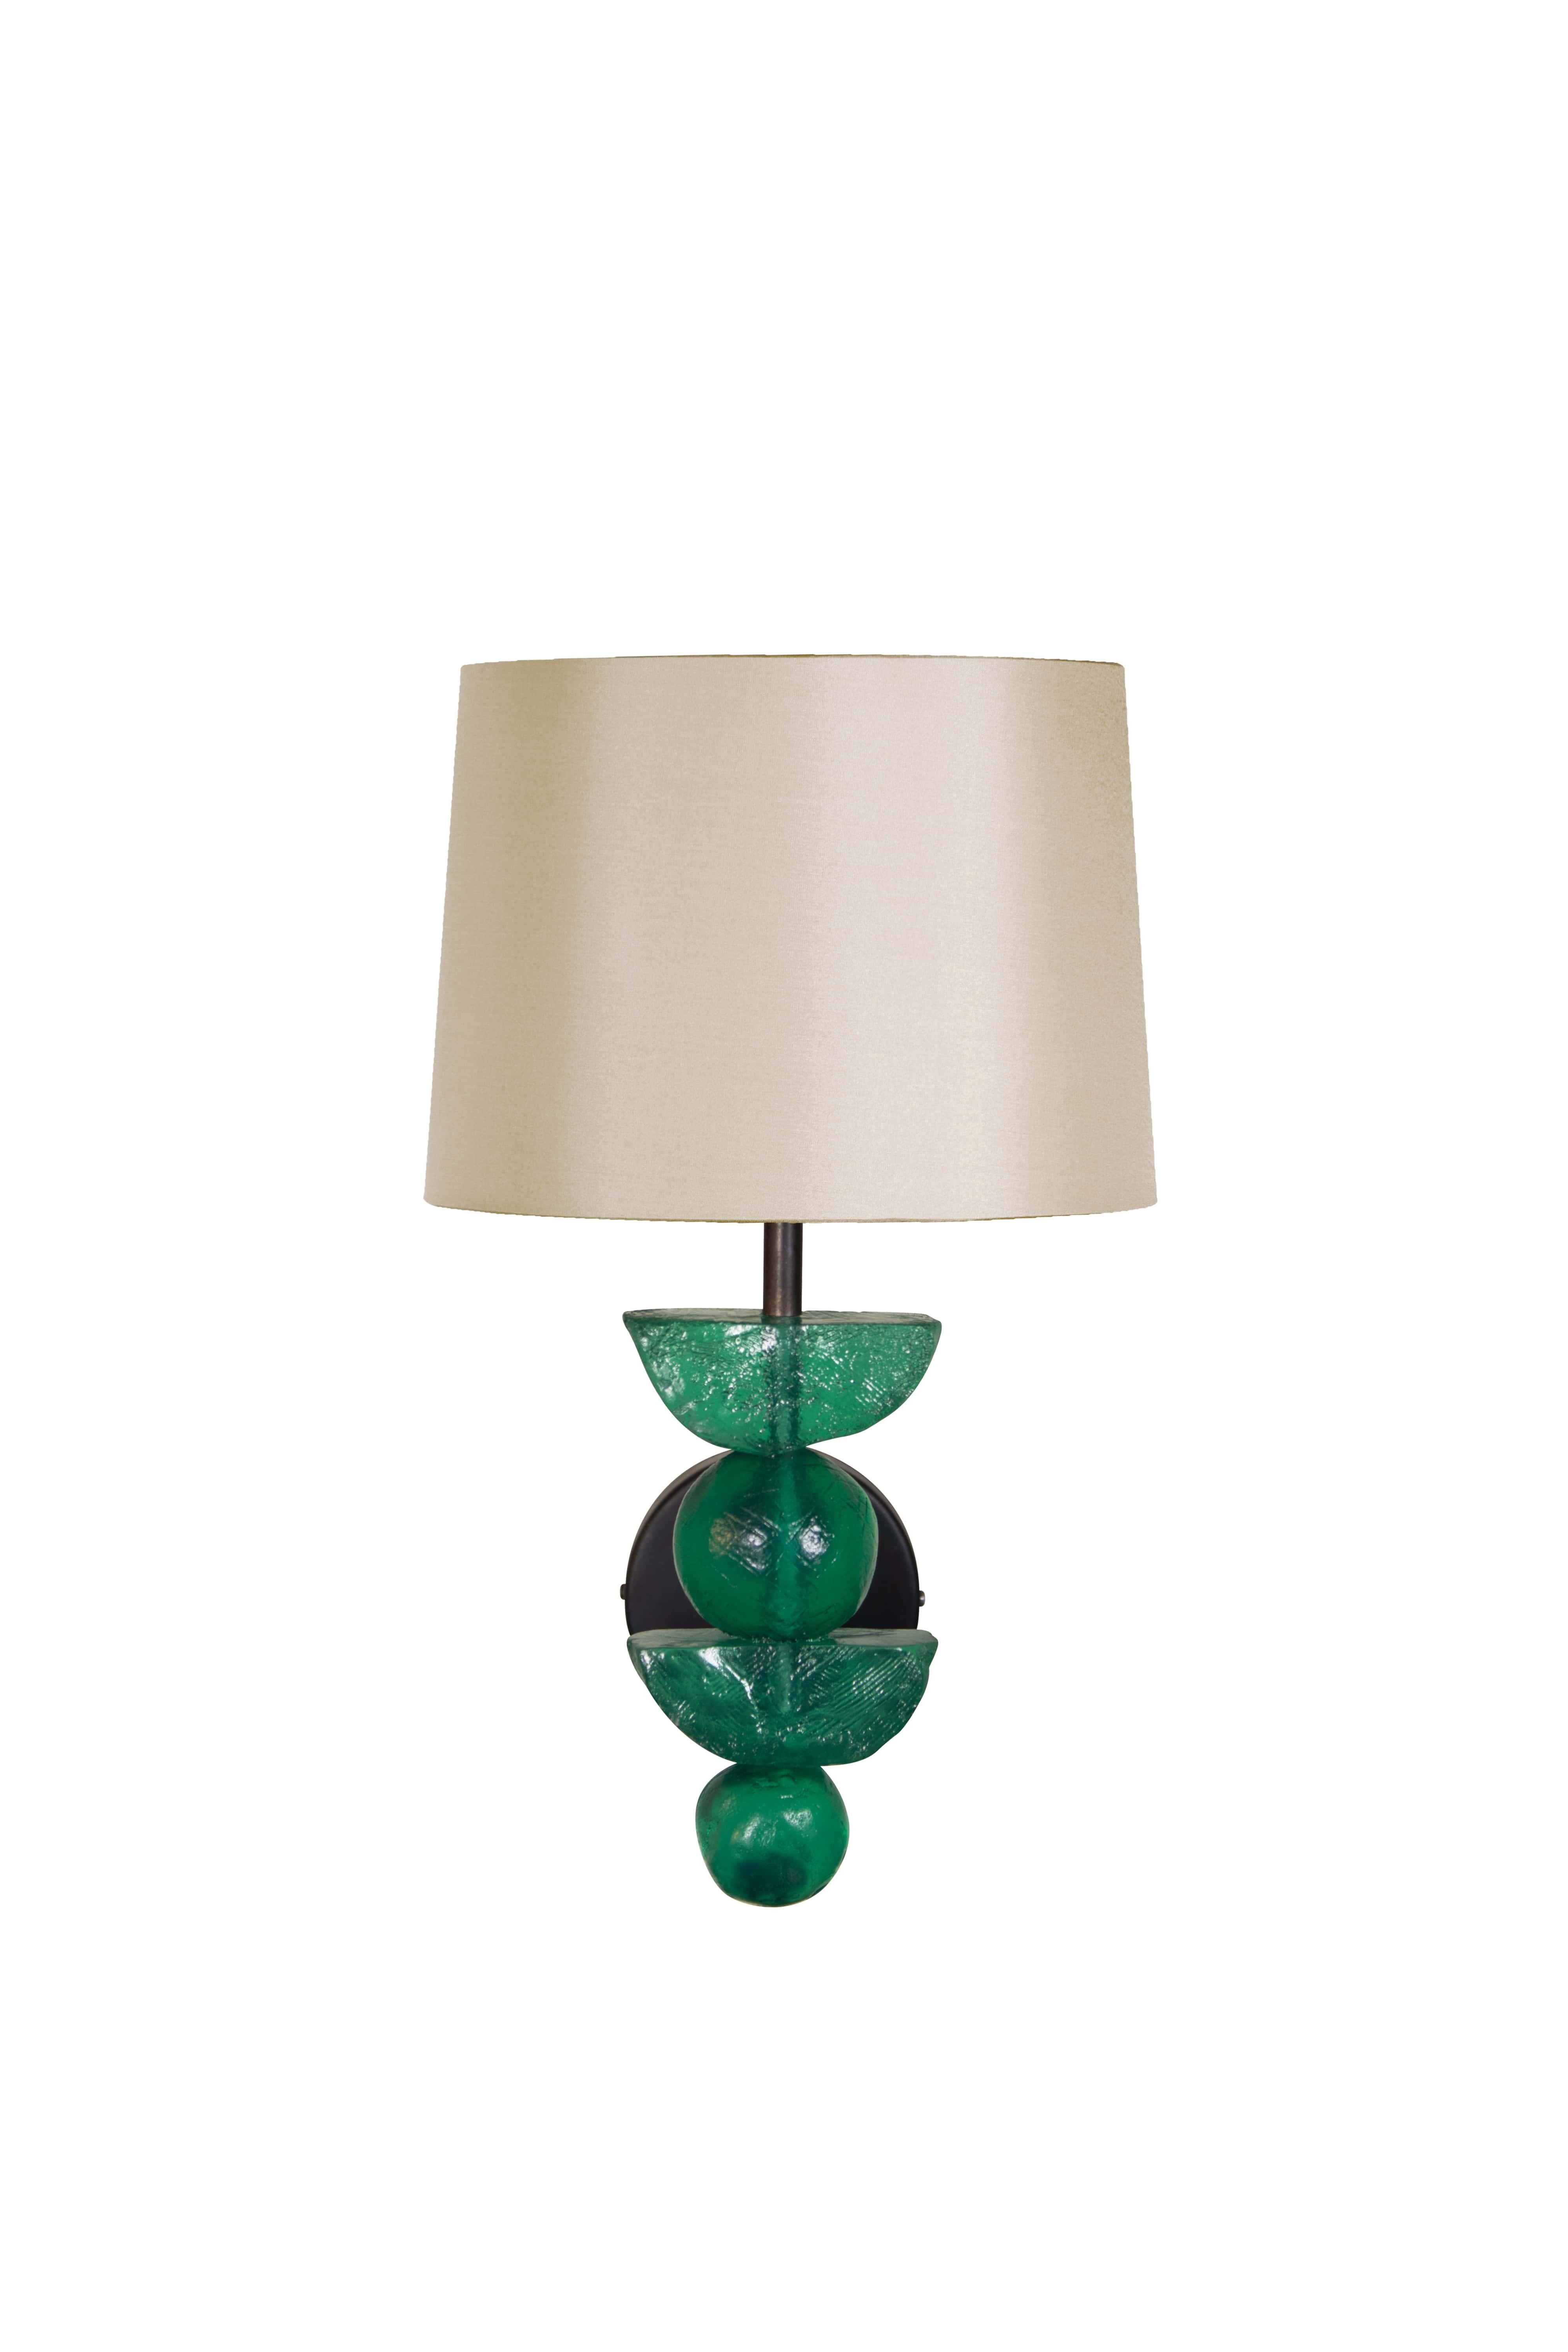 Modern Silhouette Wall Light in Emerald and Blackened Metal Finish by Margit Wittig For Sale